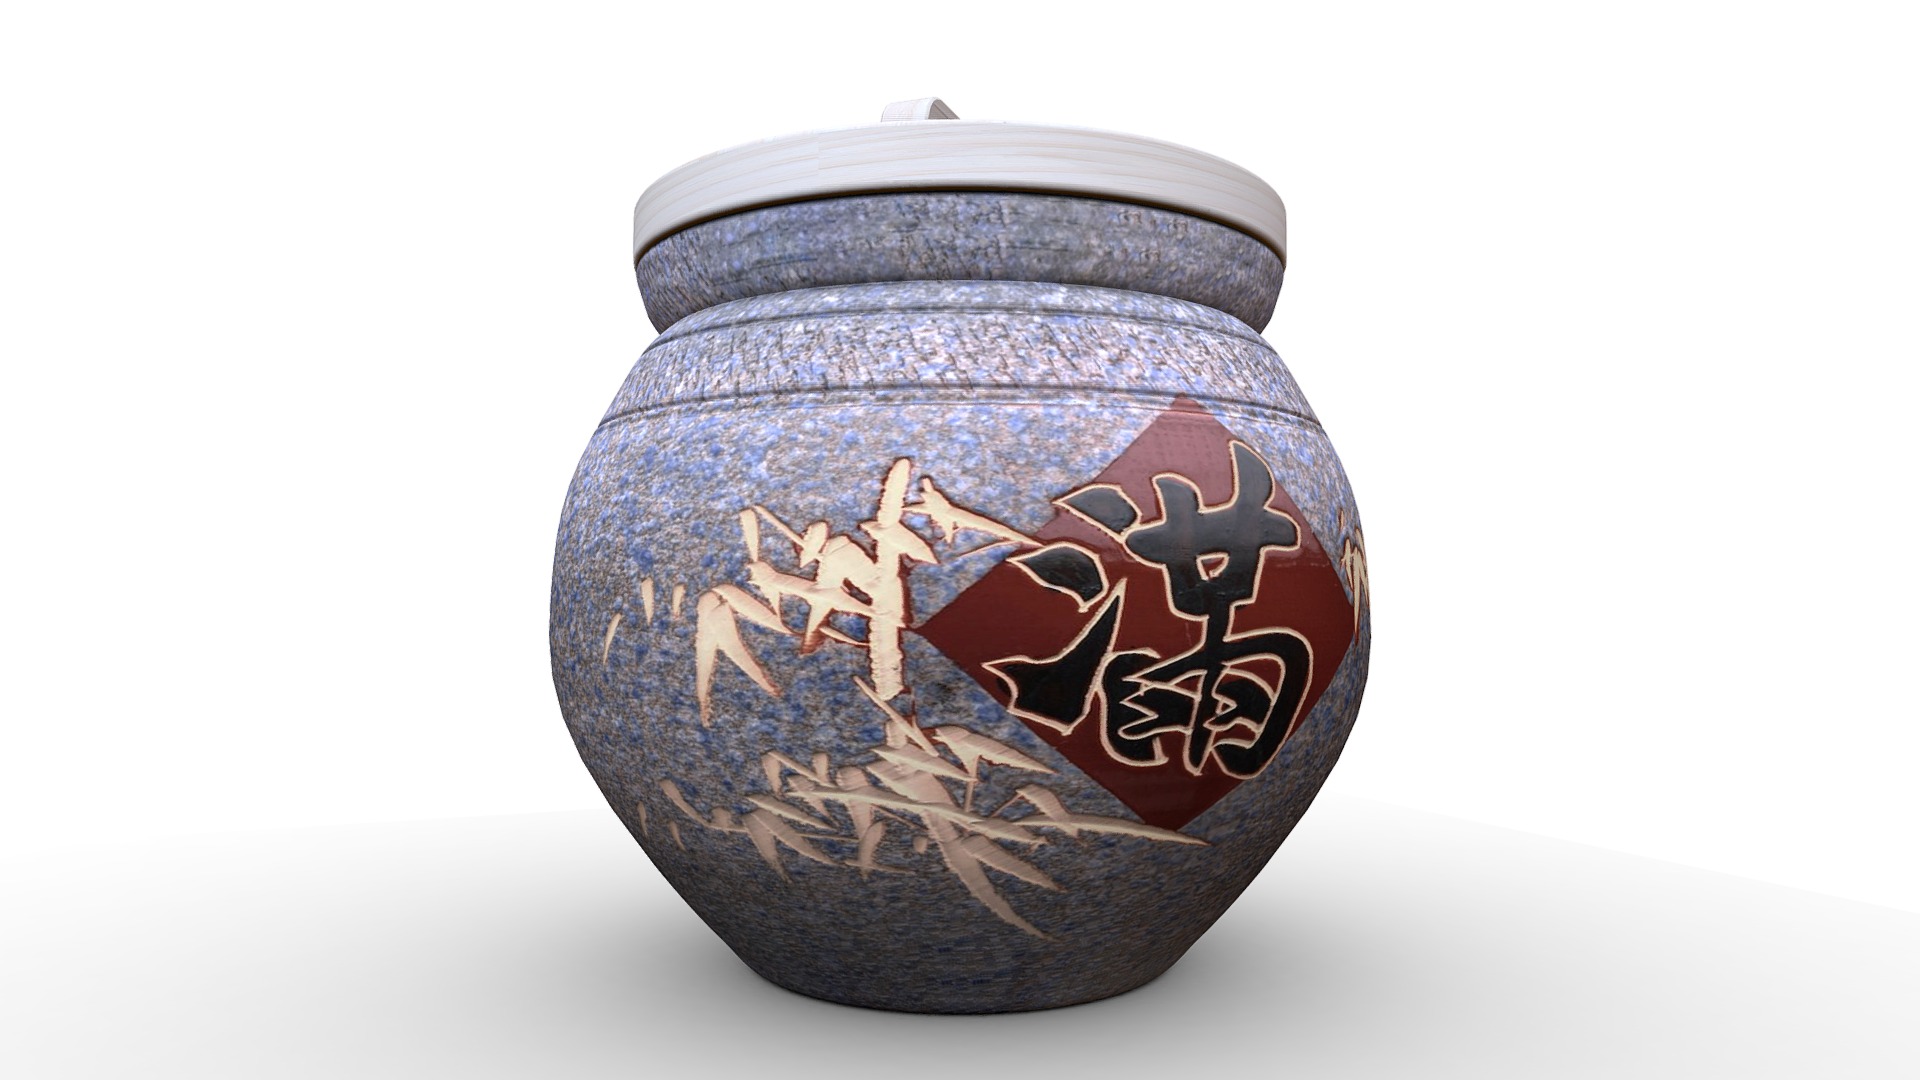 3D model 【3D模擬-上等】10斤陶藝灰『 滿足 』米甕展示 - This is a 3D model of the 【3D模擬-上等】10斤陶藝灰『 滿足 』米甕展示. The 3D model is about a jar with a drawing on it.